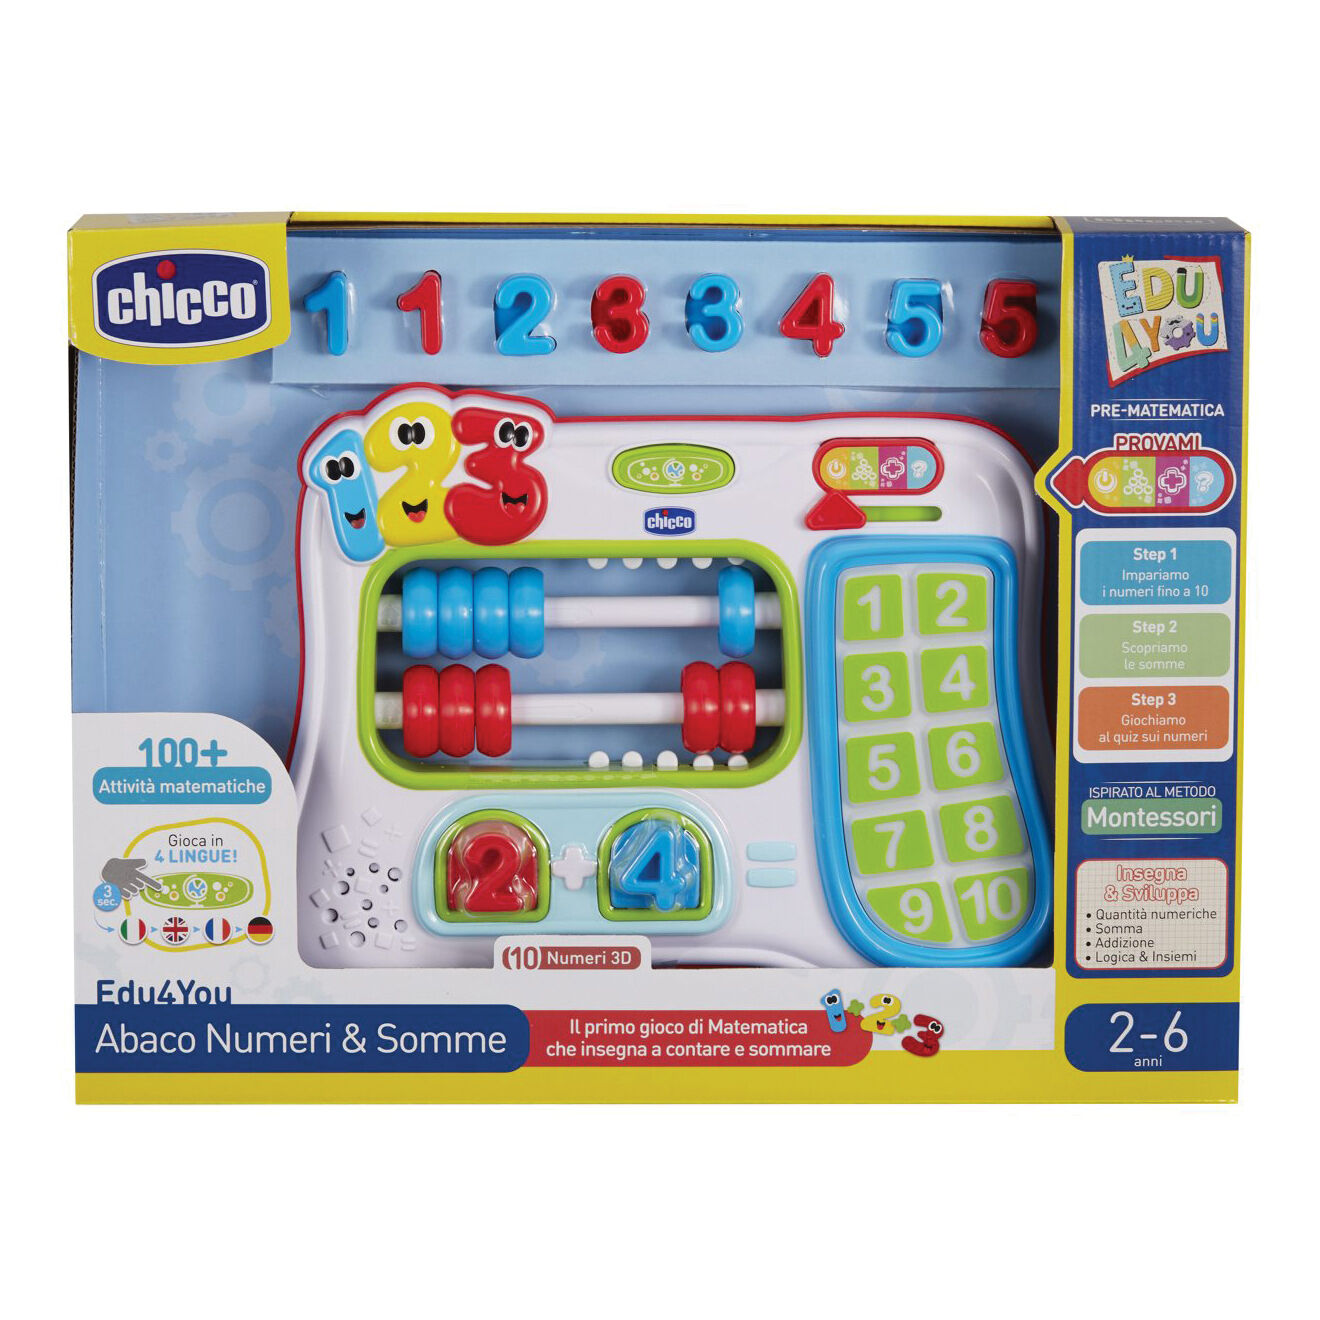 Chicco abaco, numeri & somme